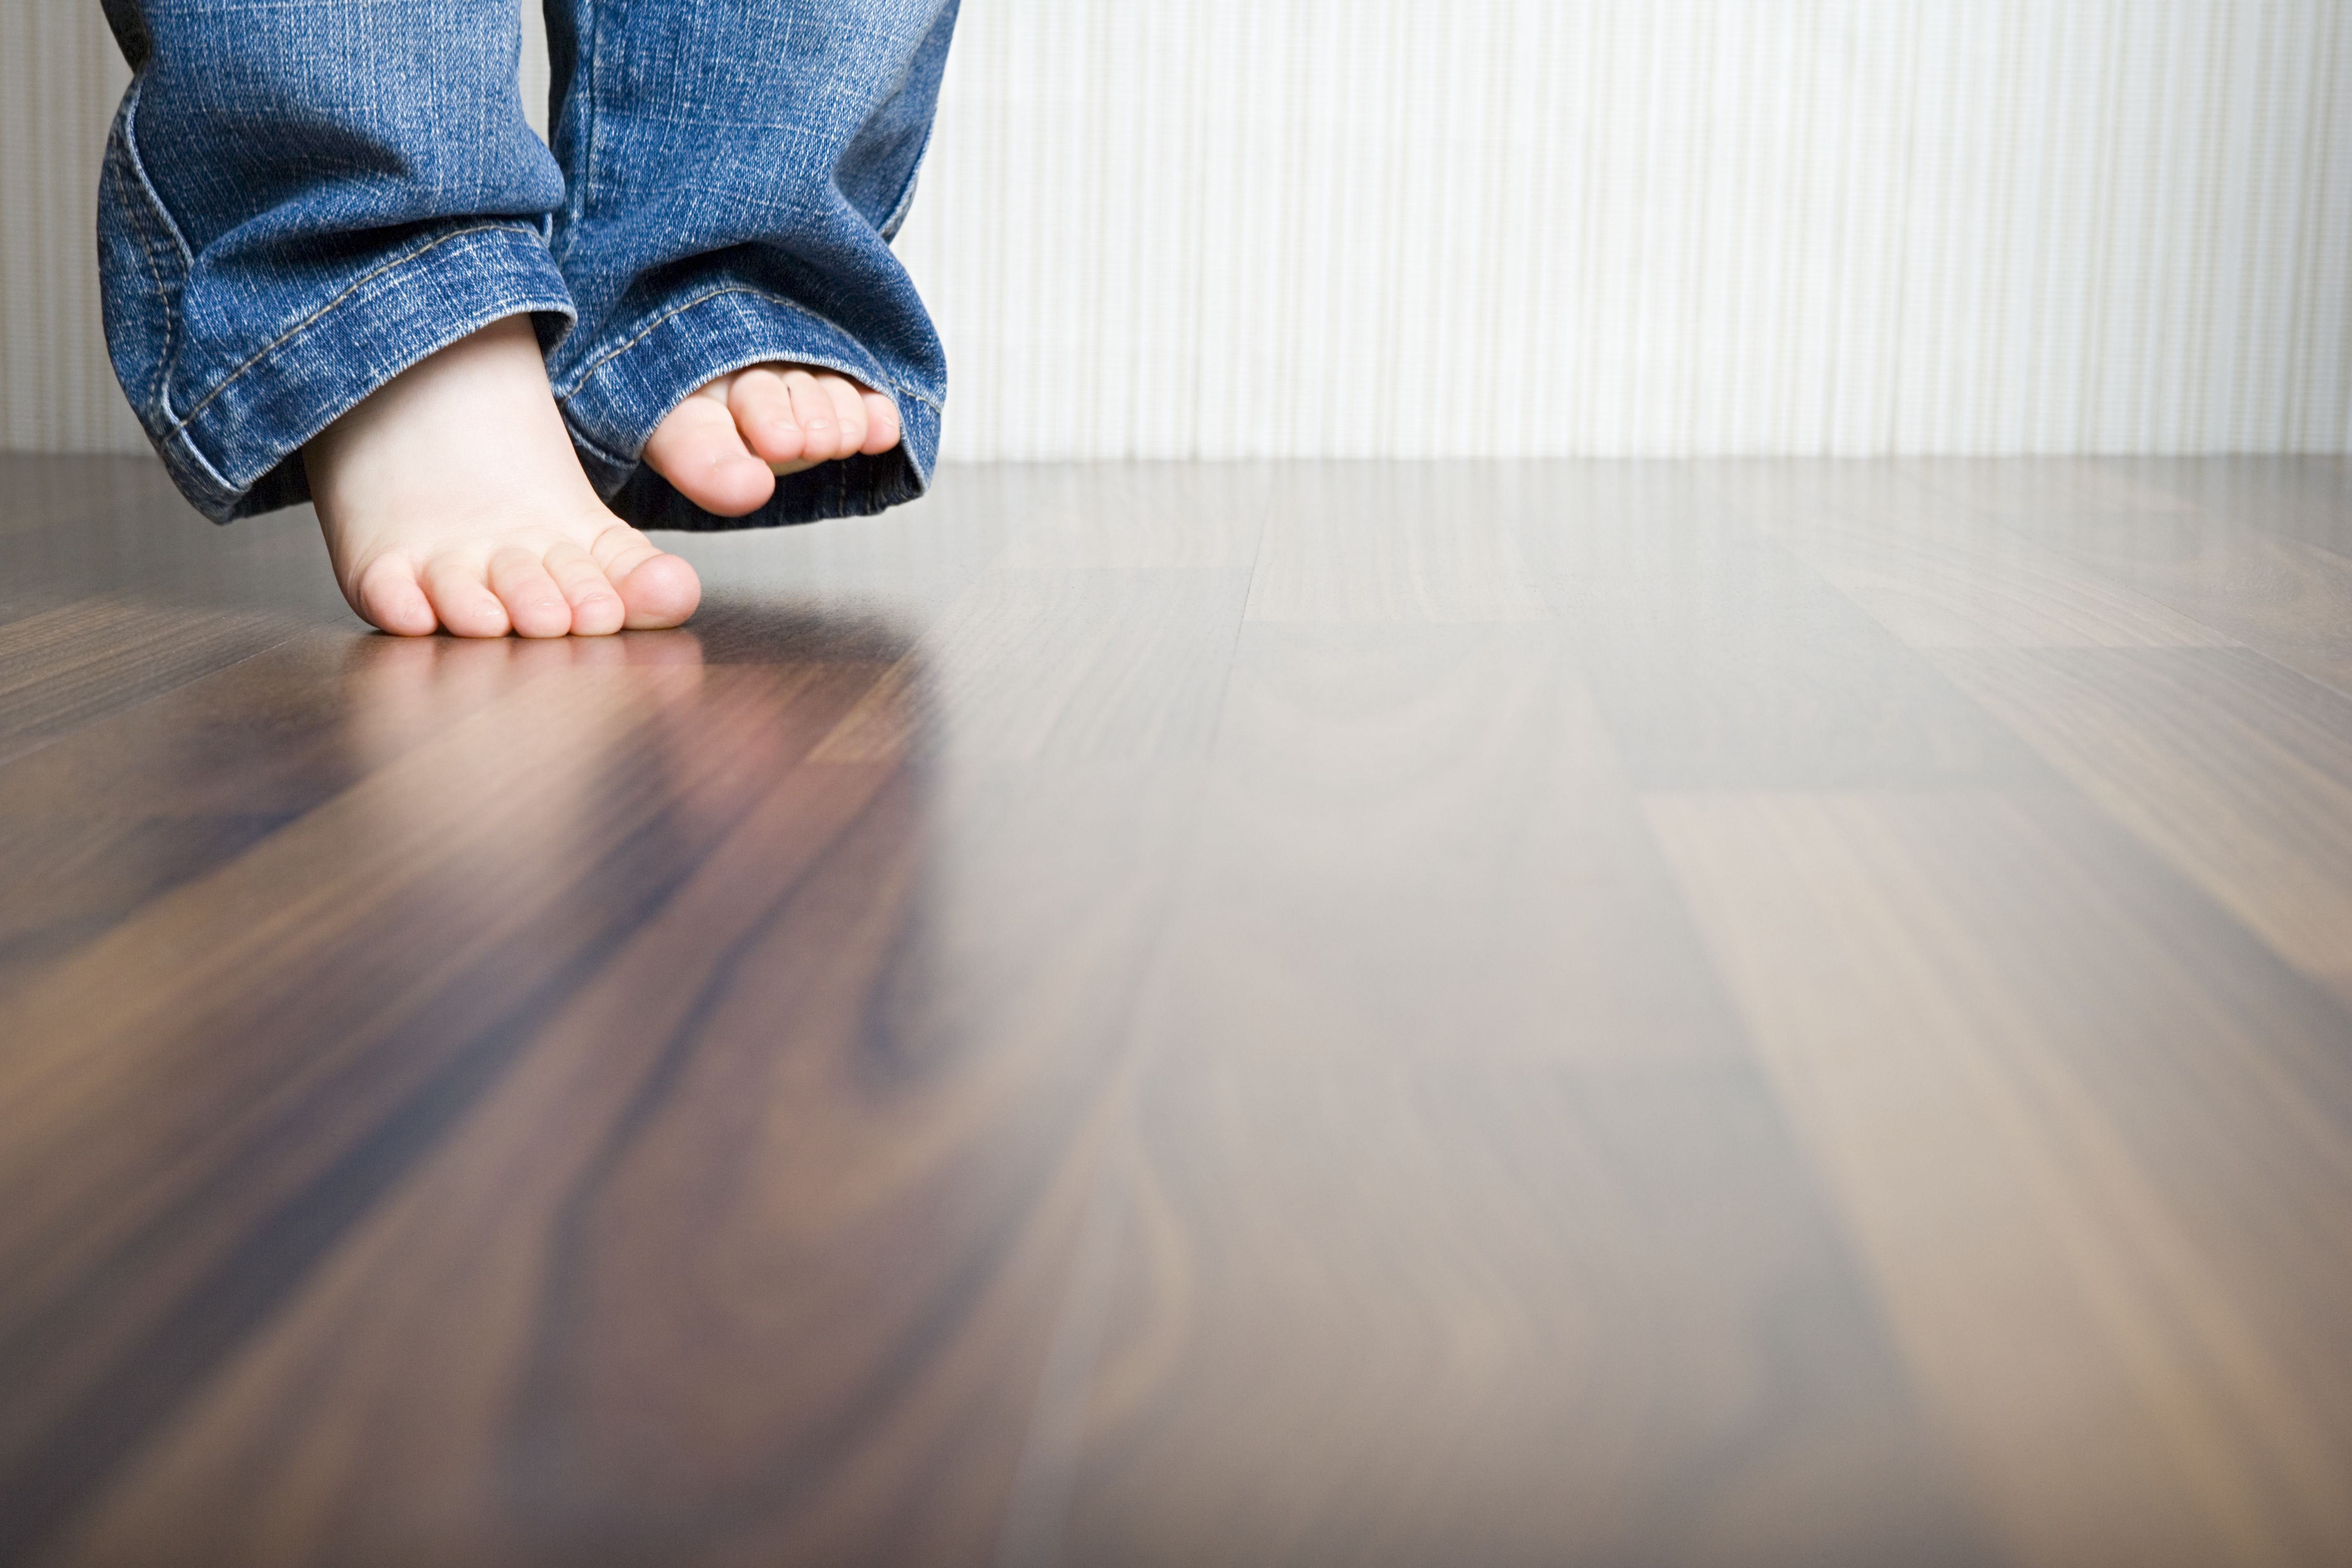 19 Great Hardwood Floor Colors 2017 2024 free download hardwood floor colors 2017 of how to clean hardwood floors best way to clean wood flooring intended for 1512149908 gettyimages 75403973